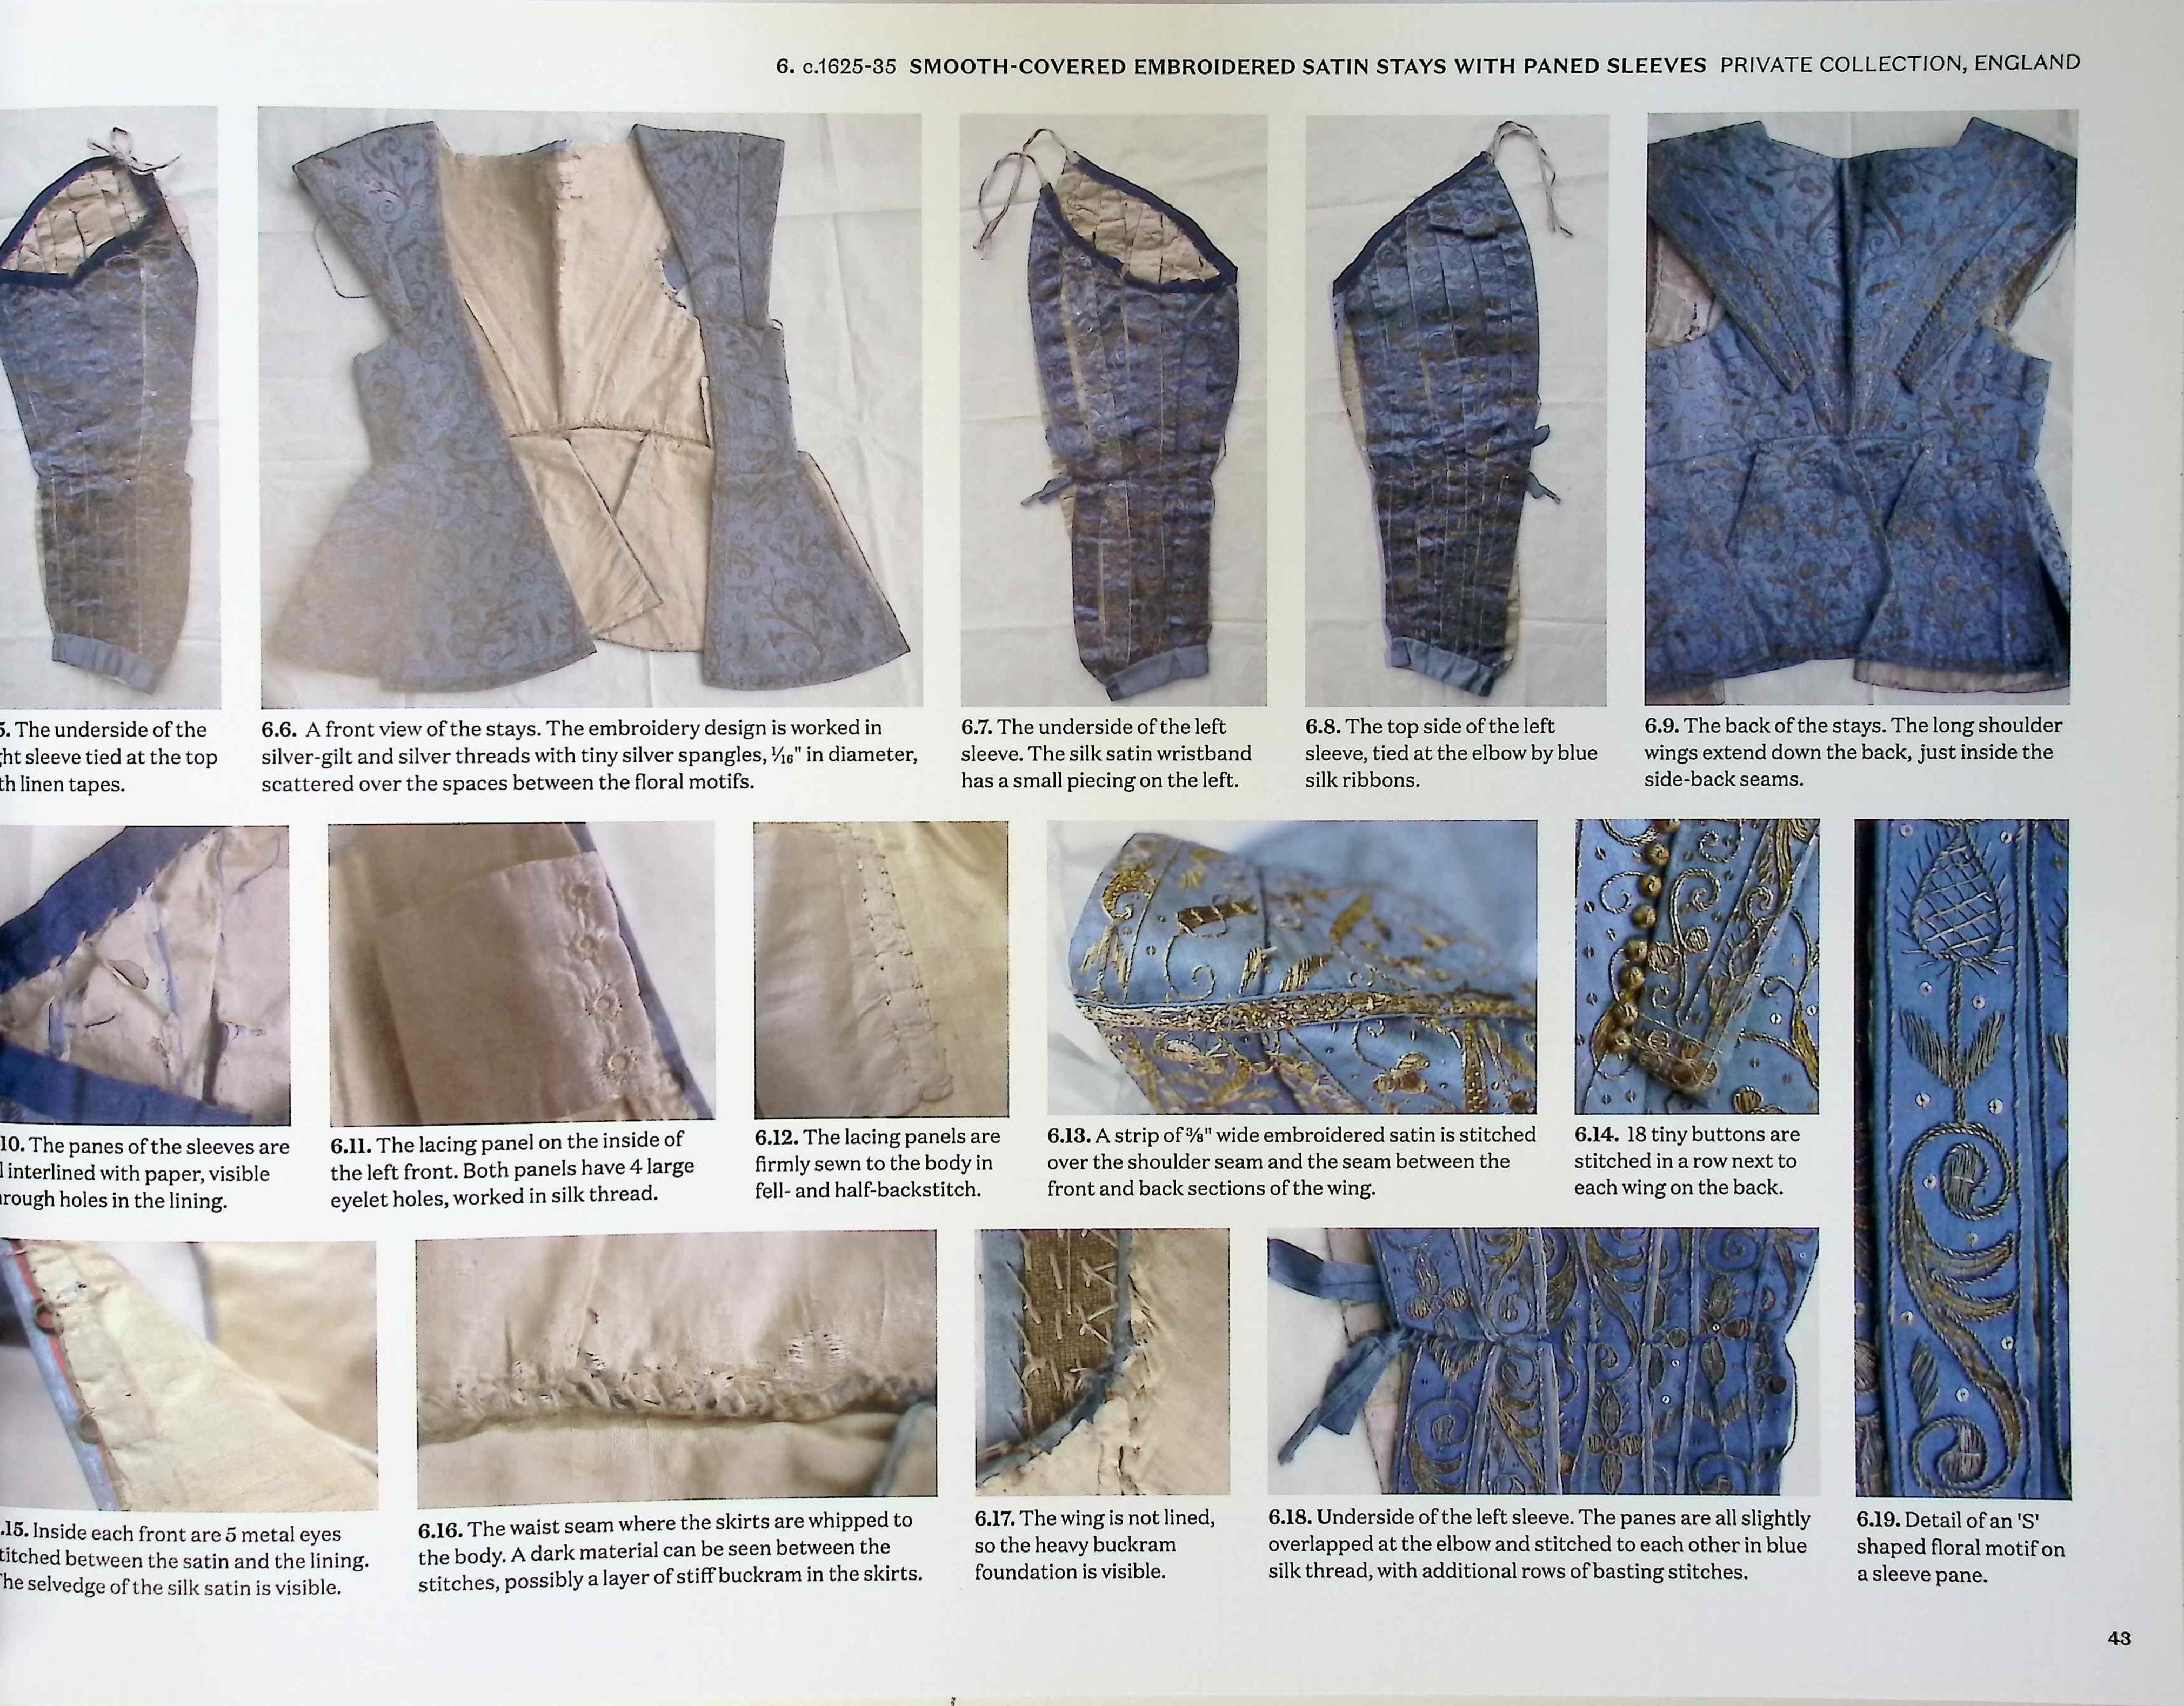 Patterns of Fashion 5. The Content, Cut, Construction and Context of Bodies, Stays, Hoops and Rumps c. 1595-1795.